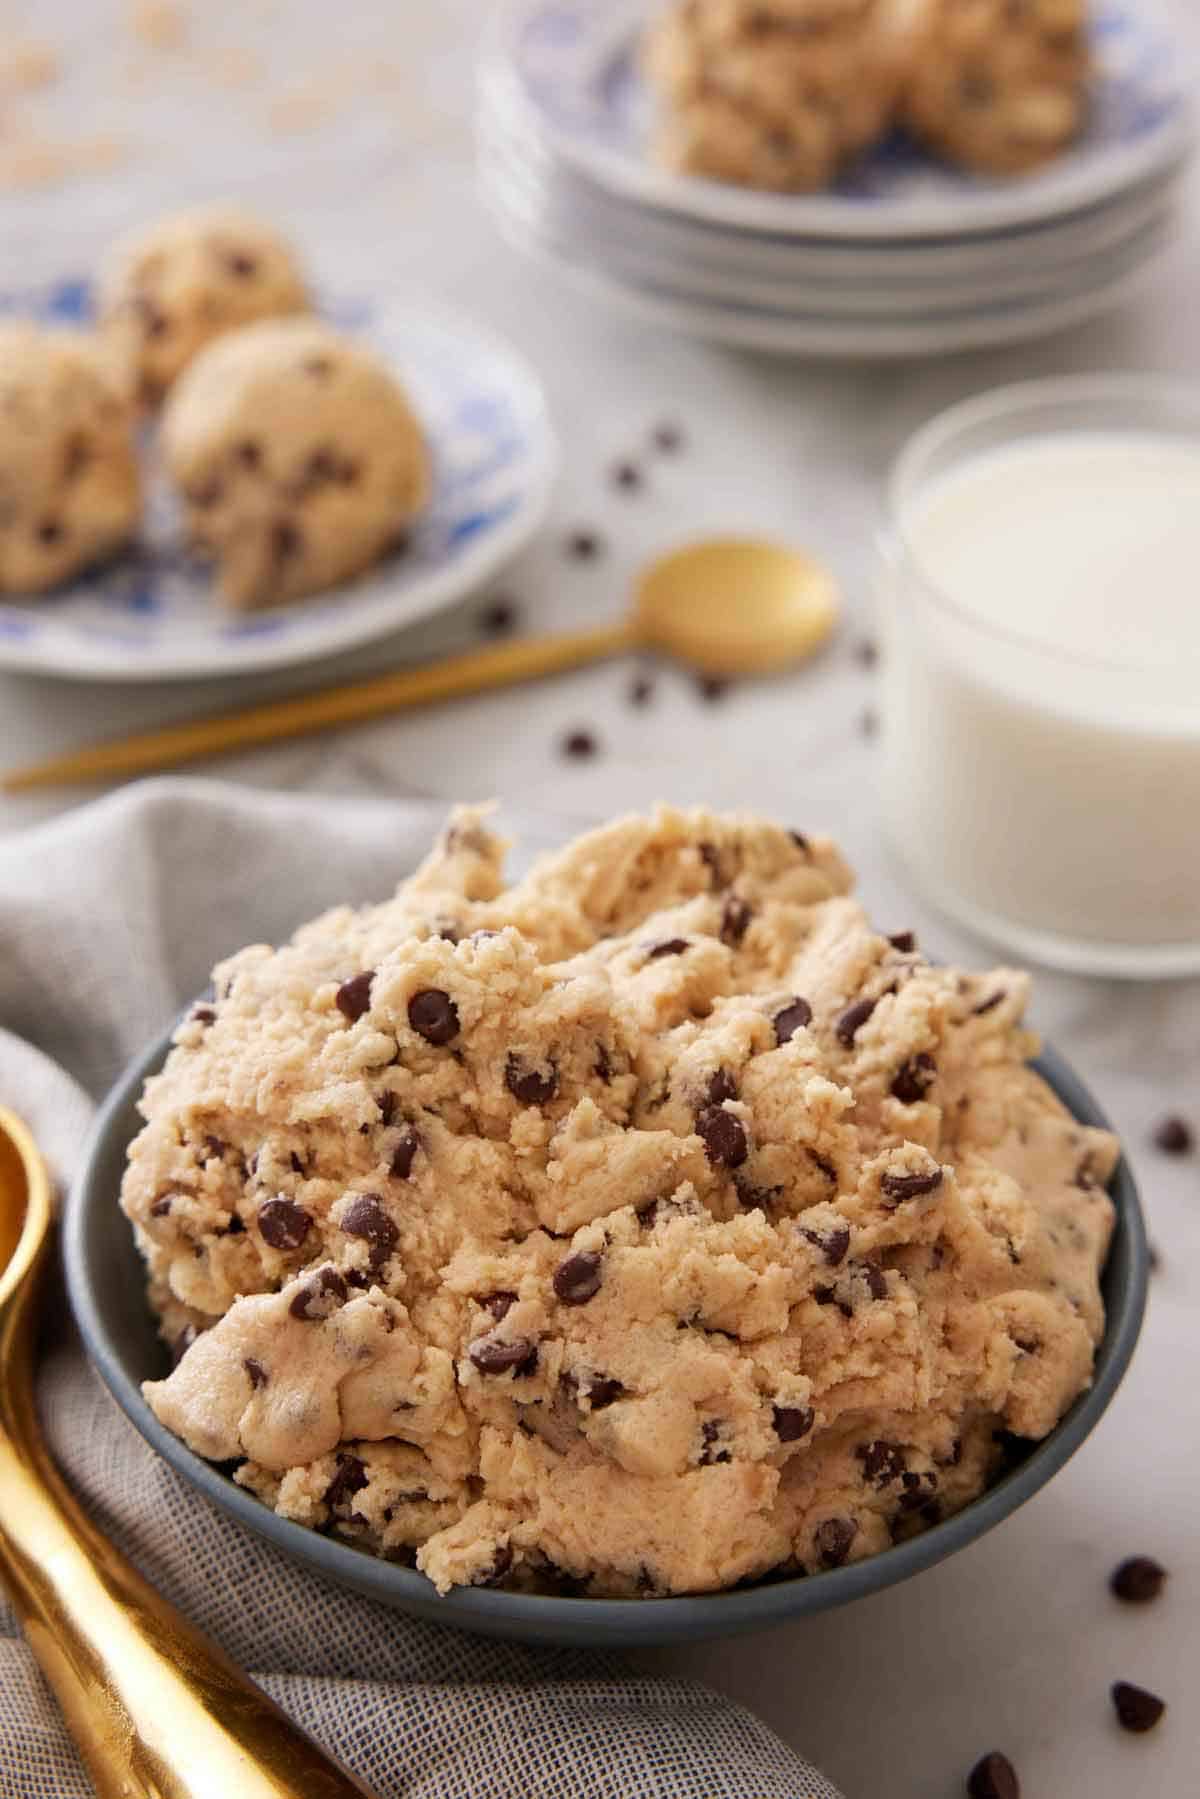 A bowl of edible cookie dough with a glass of milk in the background.